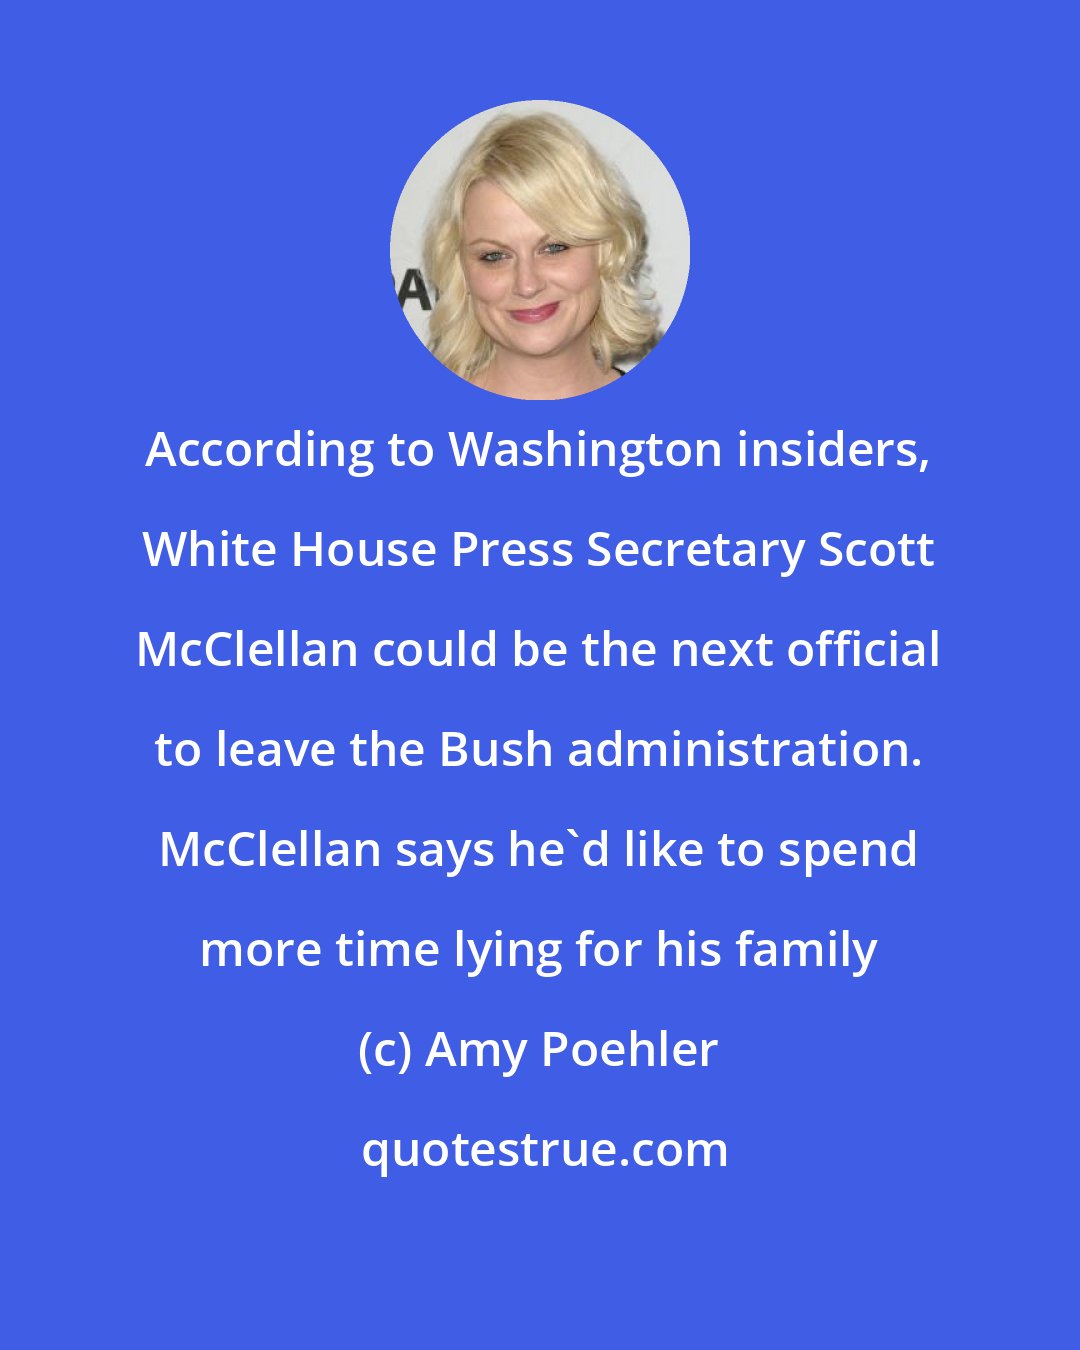 Amy Poehler: According to Washington insiders, White House Press Secretary Scott McClellan could be the next official to leave the Bush administration. McClellan says he'd like to spend more time lying for his family